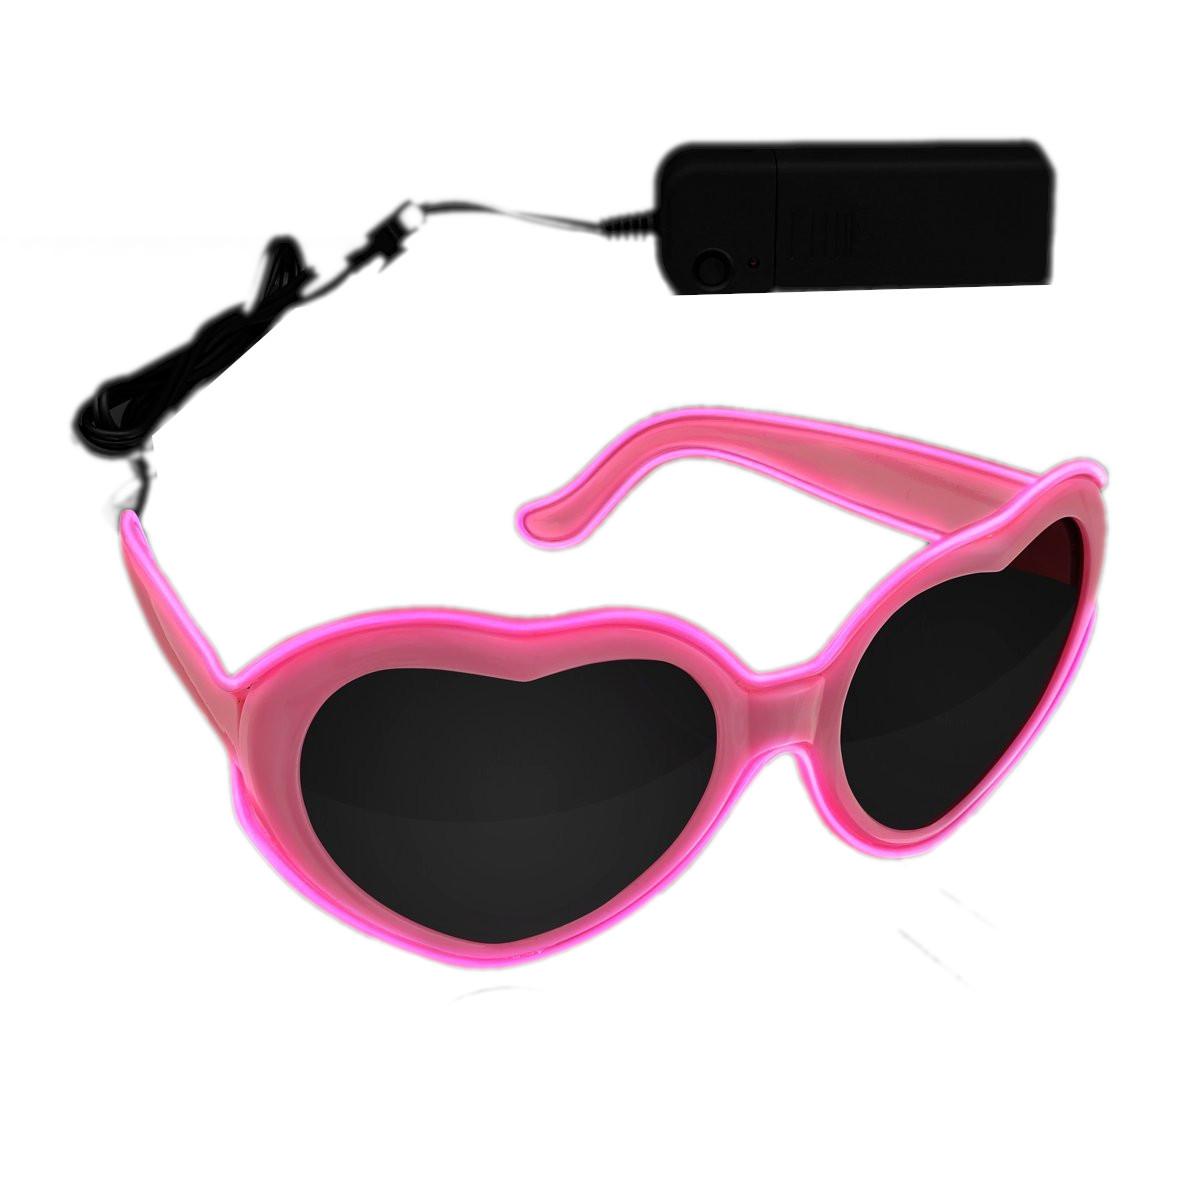 Stylish Heart-Shaped Glowing Pink EL Wire Sunglasses All Products 3